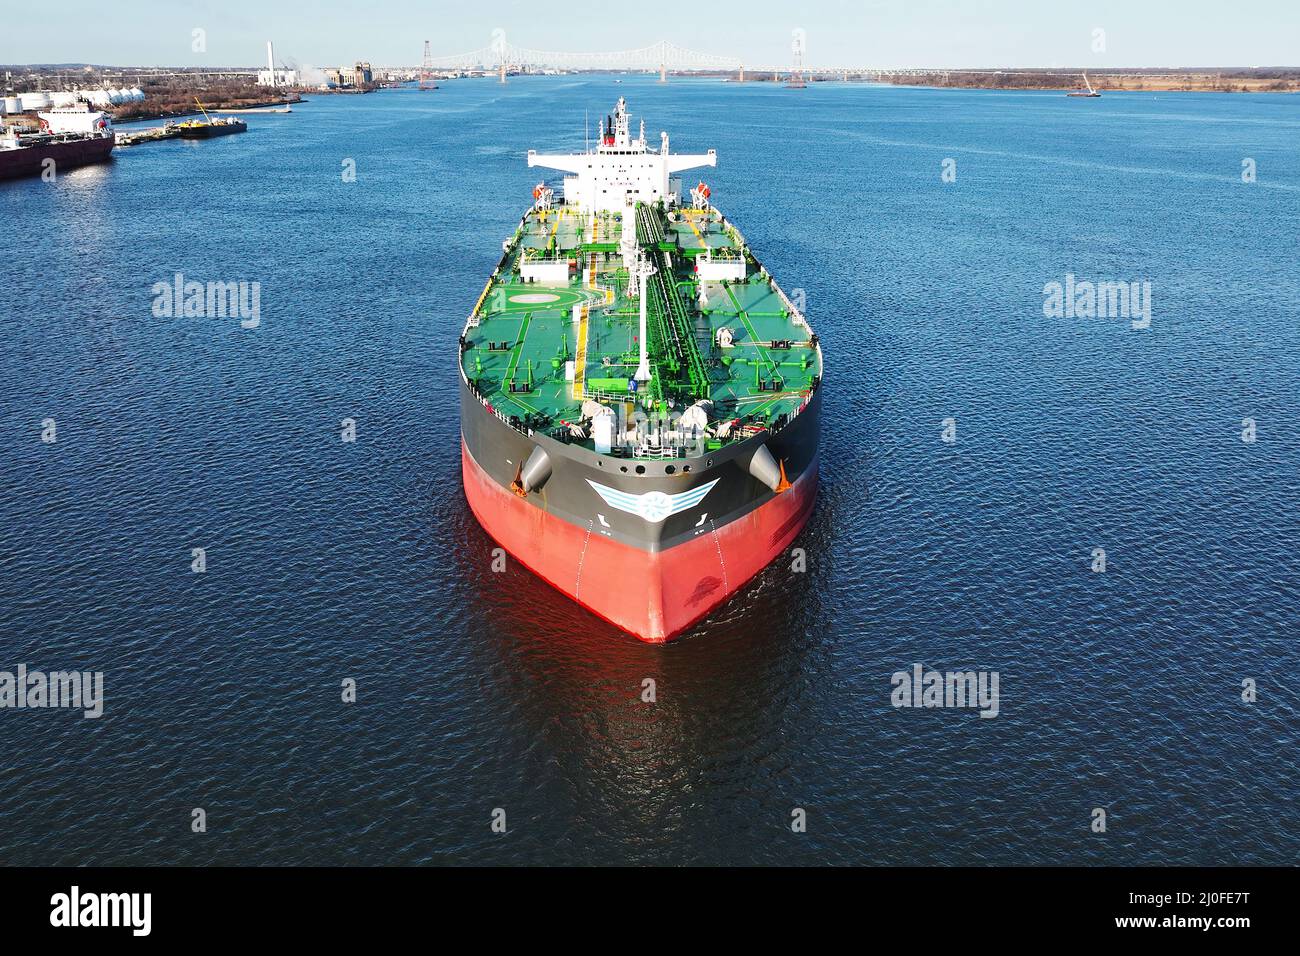 Aerial Drone View of Crude Oil Tanker Leaving Port Aerial Drone View of Crude Oil Tanker Leaving Port Stock Photo